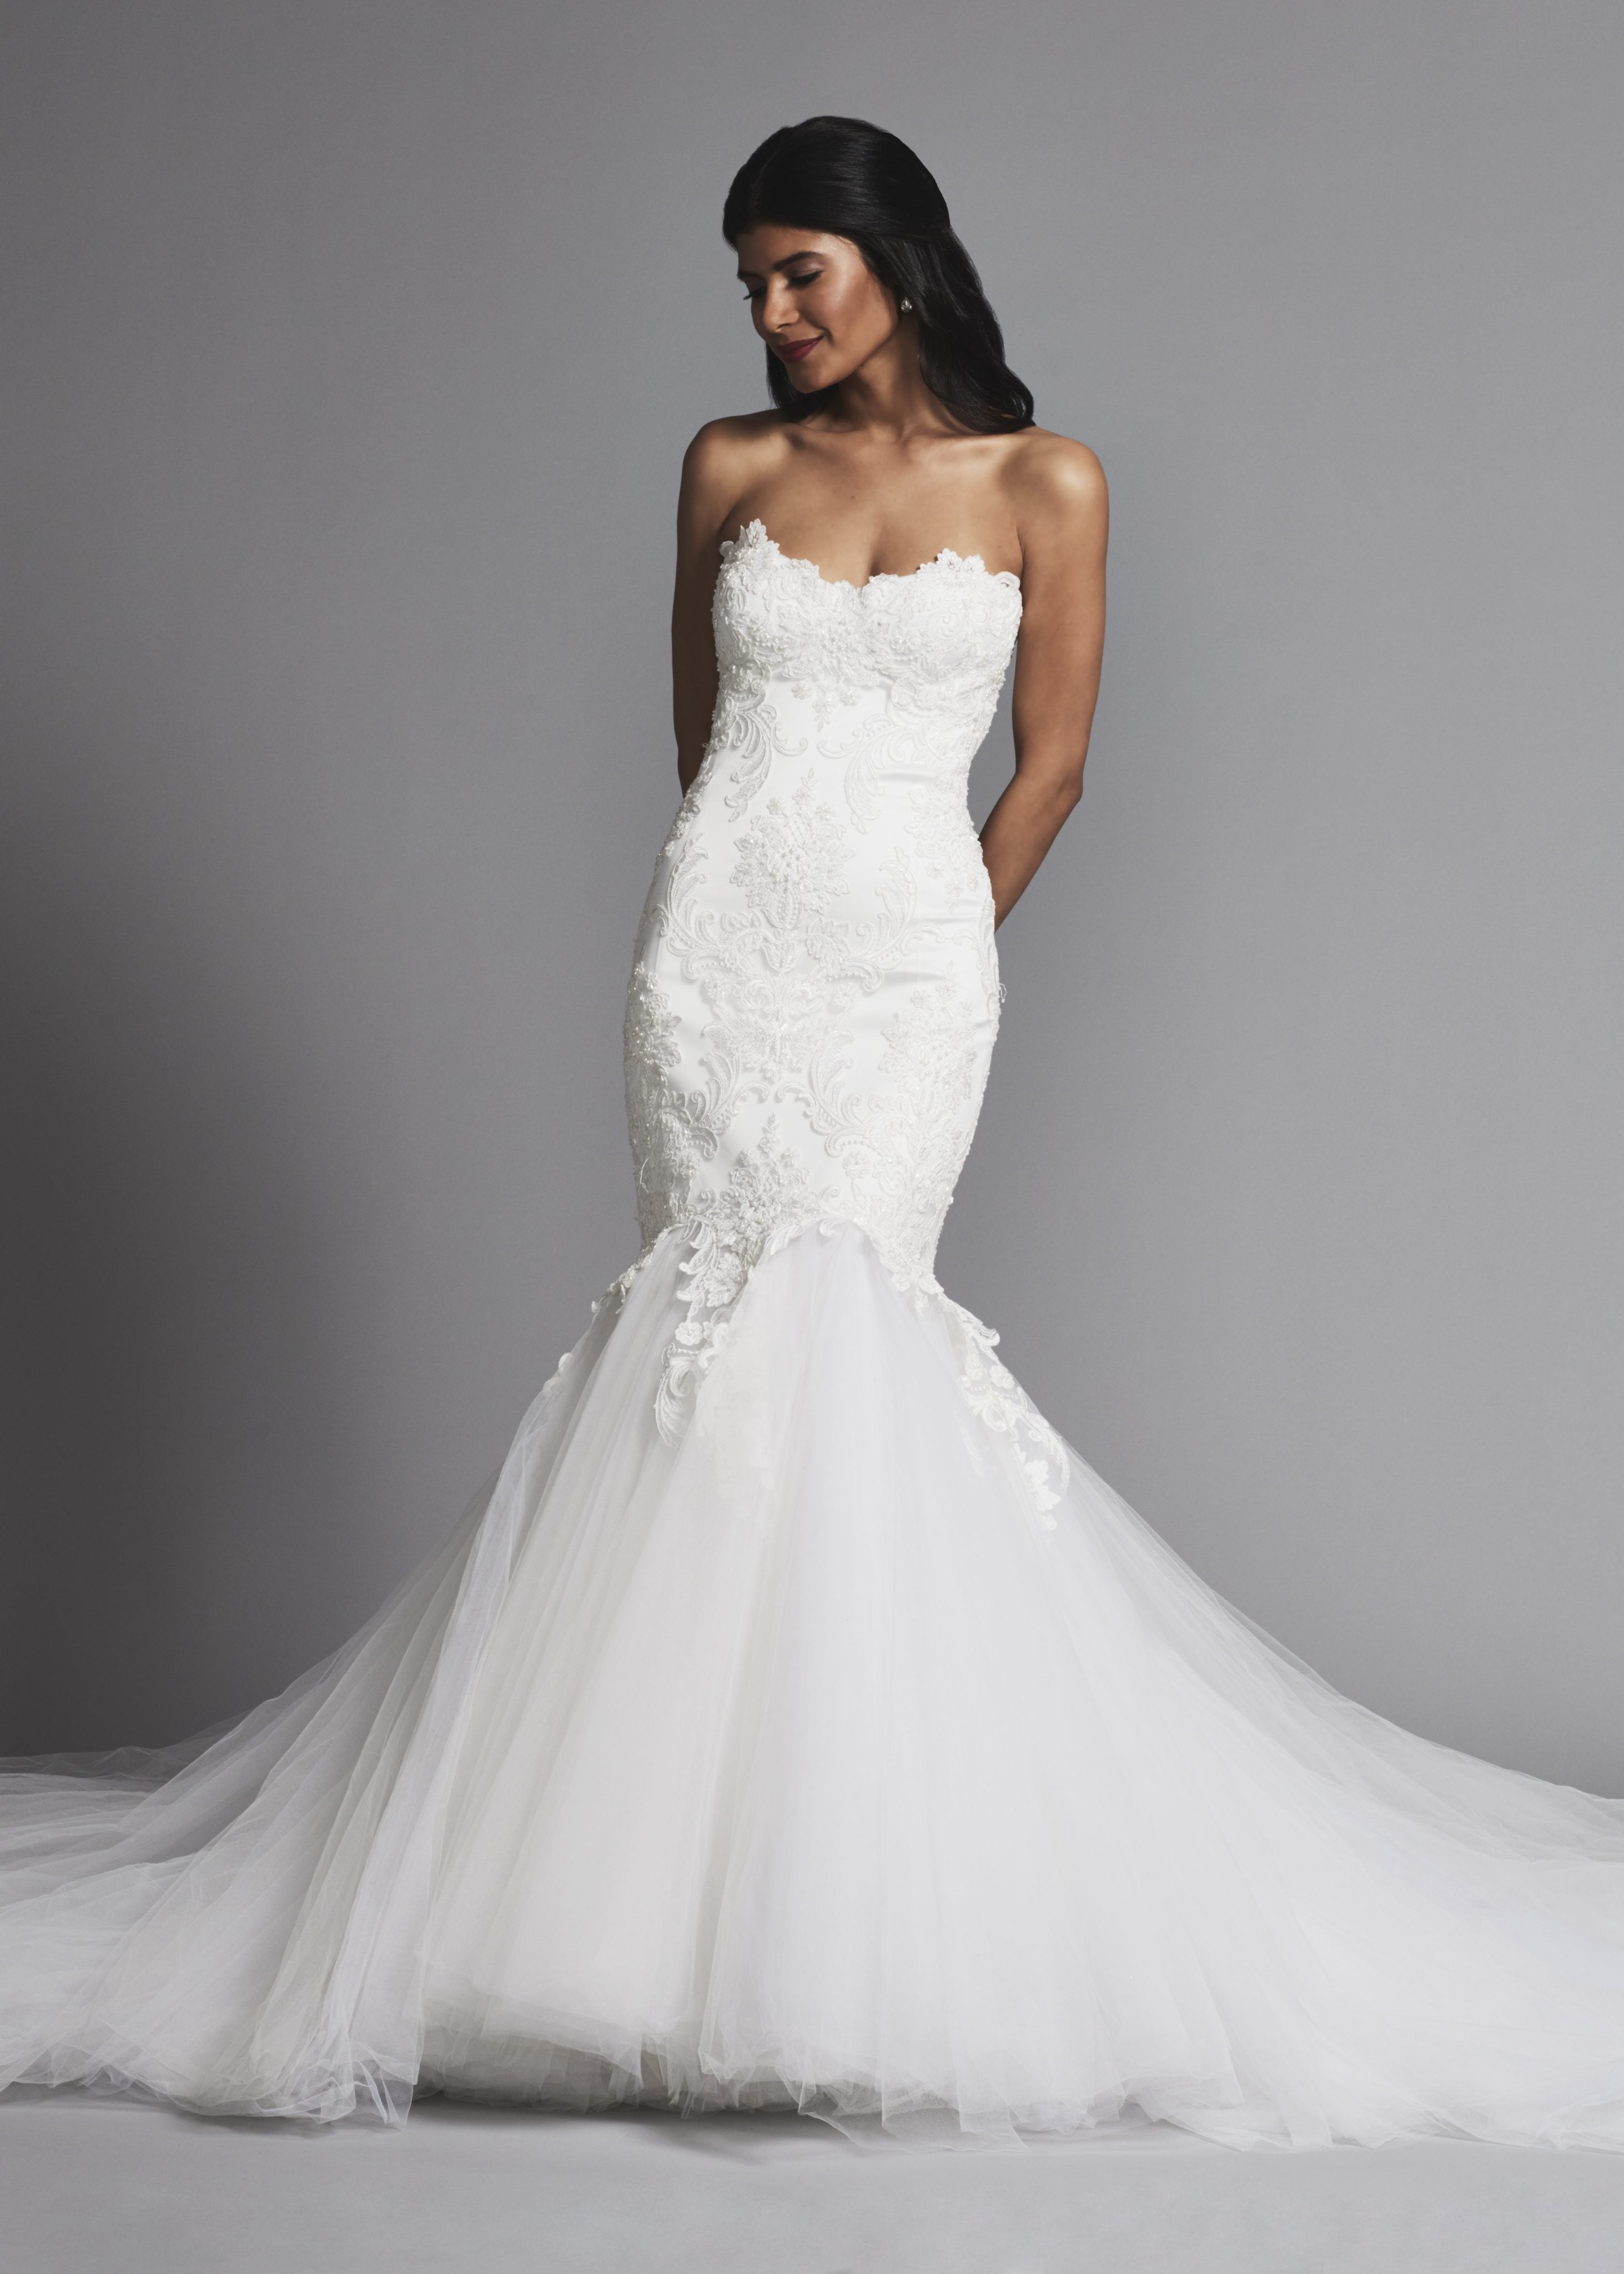 Romantic Lace Mermaid  Wedding  Dress  With Full Tulle Skirt 